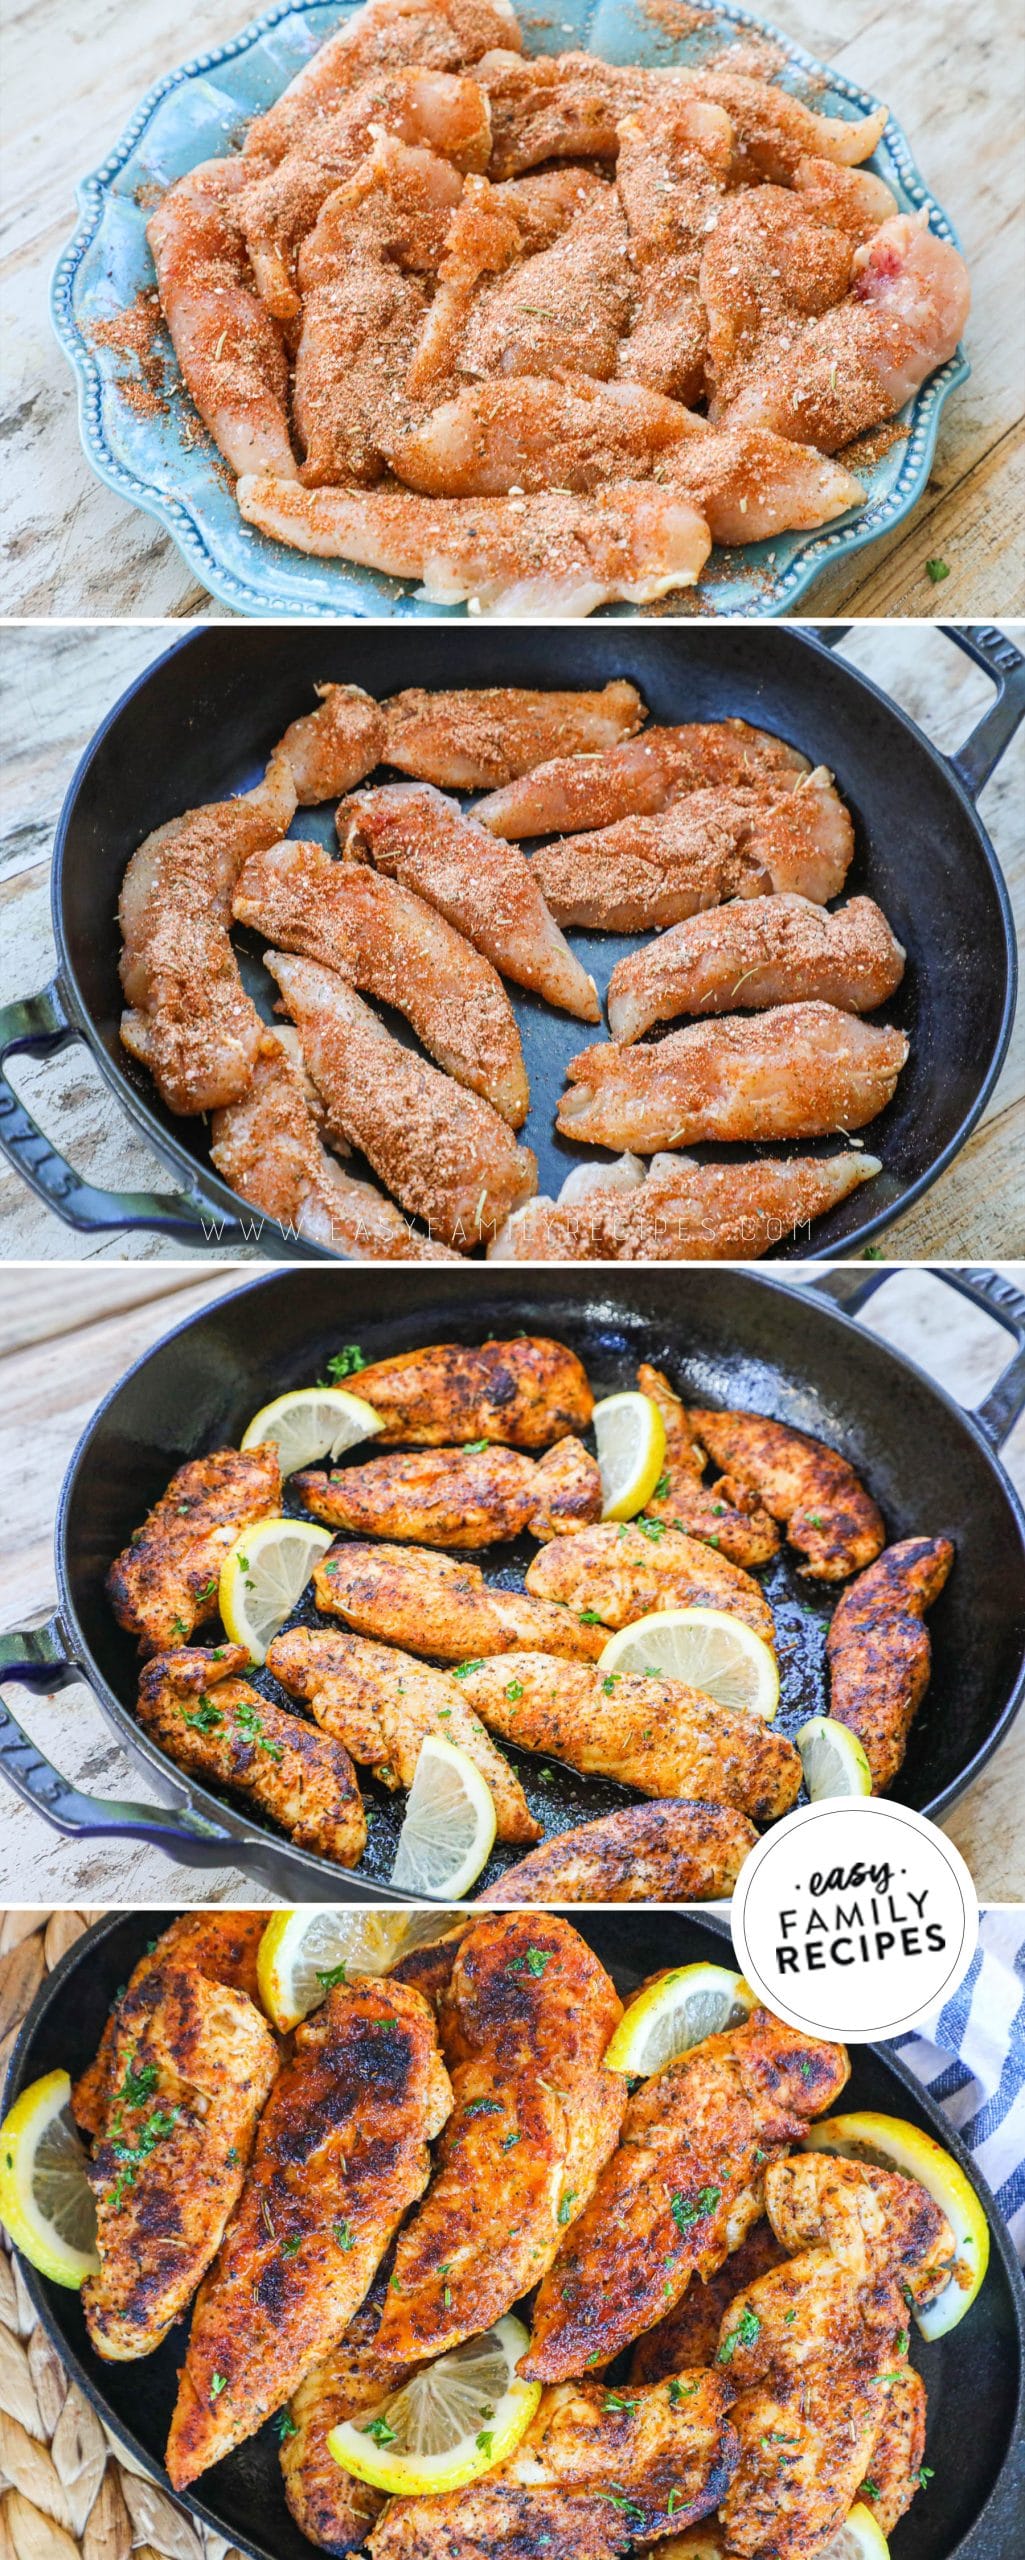 How to make blackened chicken tenders 1. make spice rub and pat onto the chicken tenders. 2. Place the chicken tenders in a hot pan with melted butter. 3. Cook for 2-3 minutes per side. 4. Remove from pan and enjoy.